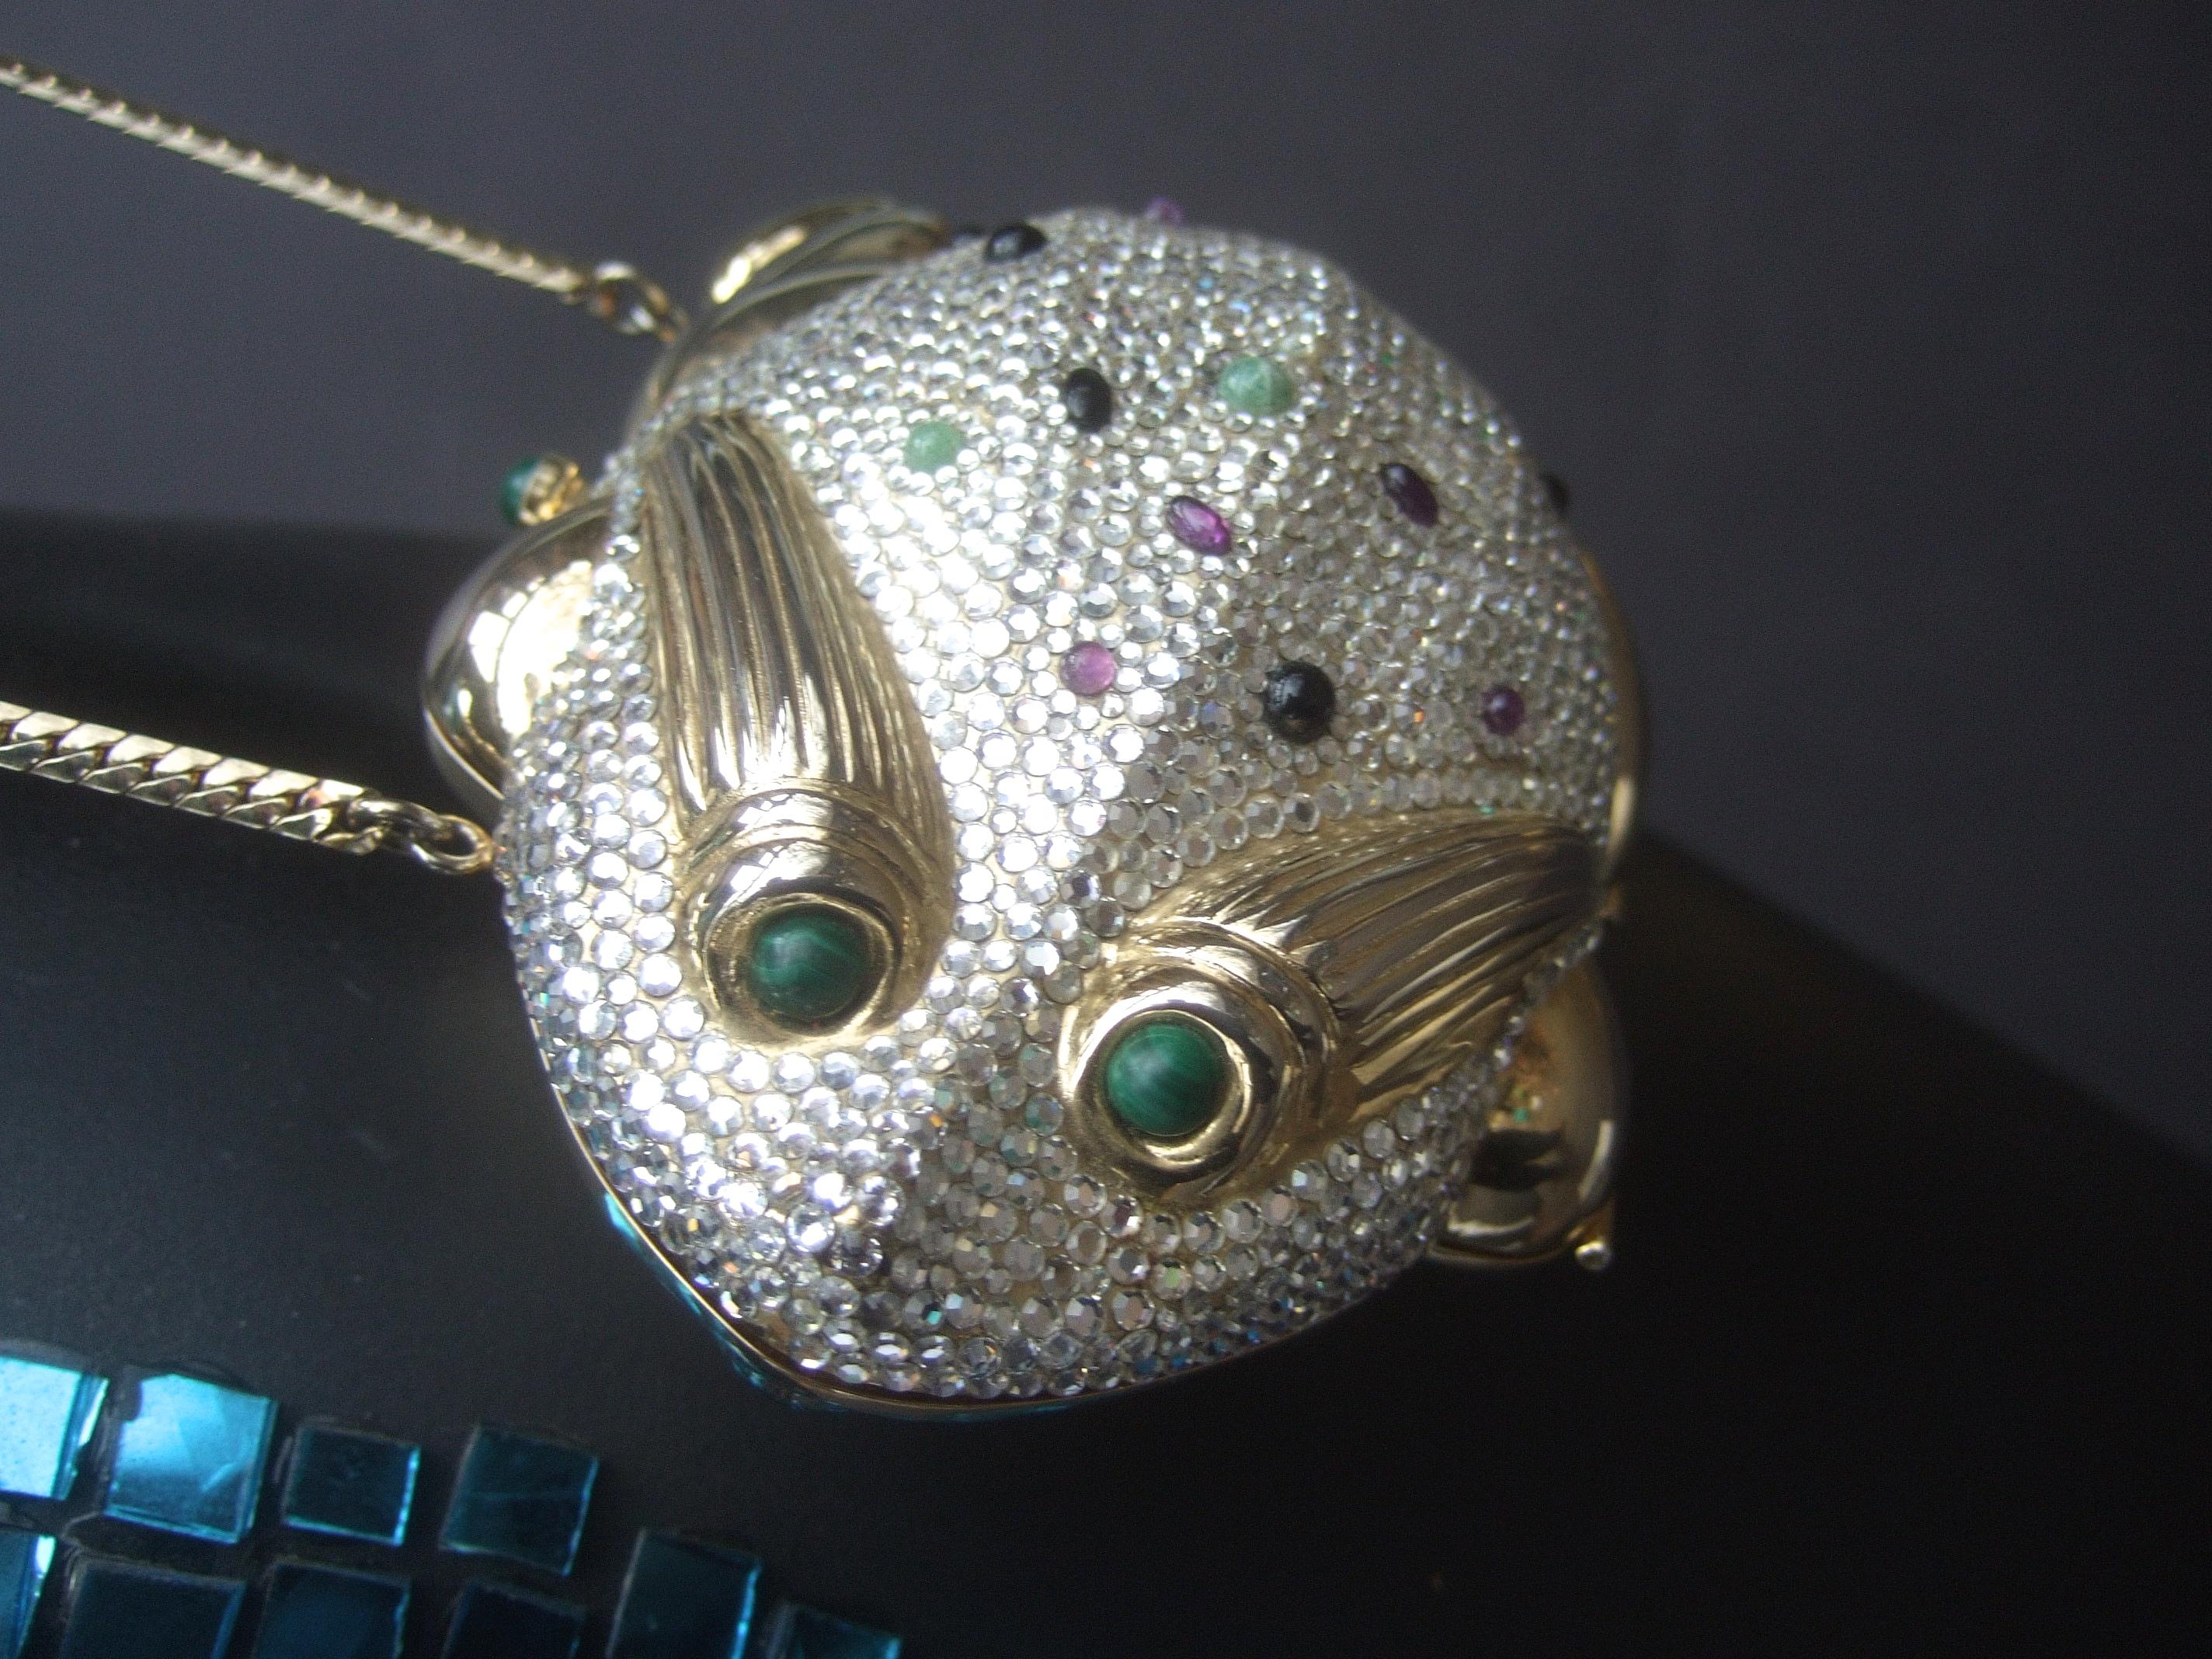 Judith Leiber Crystal Jeweled Frog Minaudière c 1980s For Sale 7